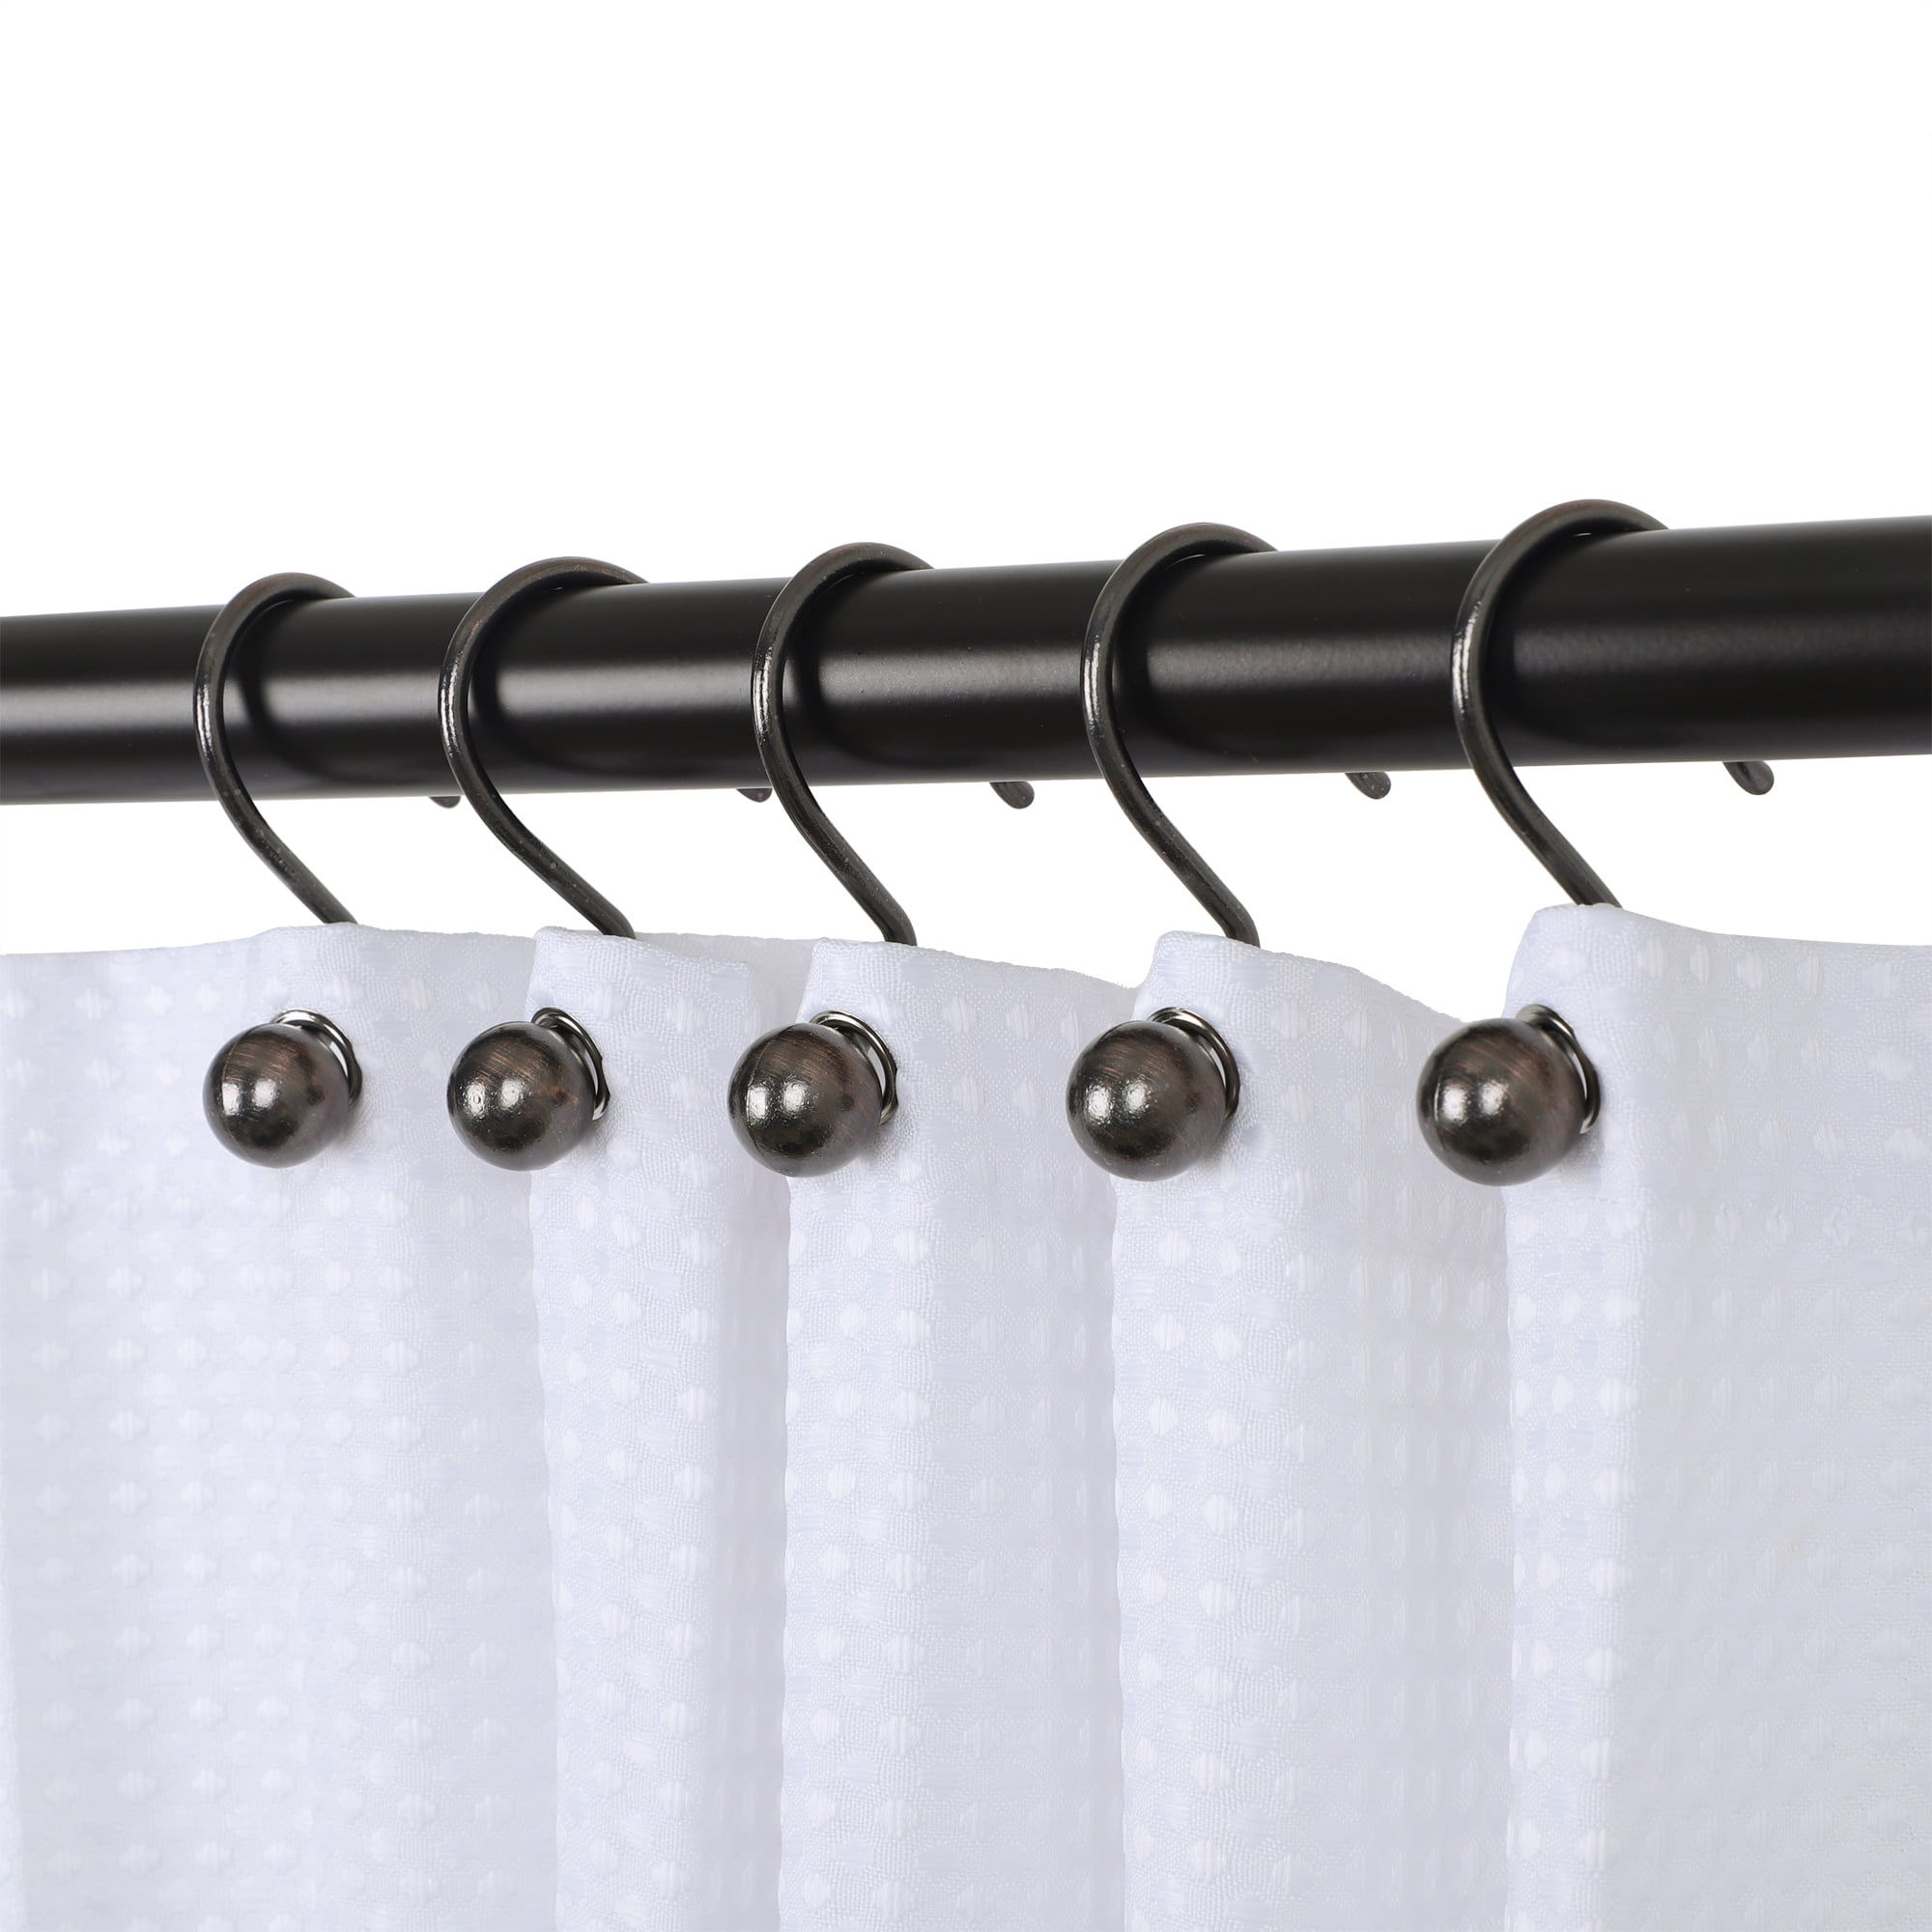 OIL RUBBED BRONZE SHOWER CURTAIN HOOKS SET OF 12 NEW 